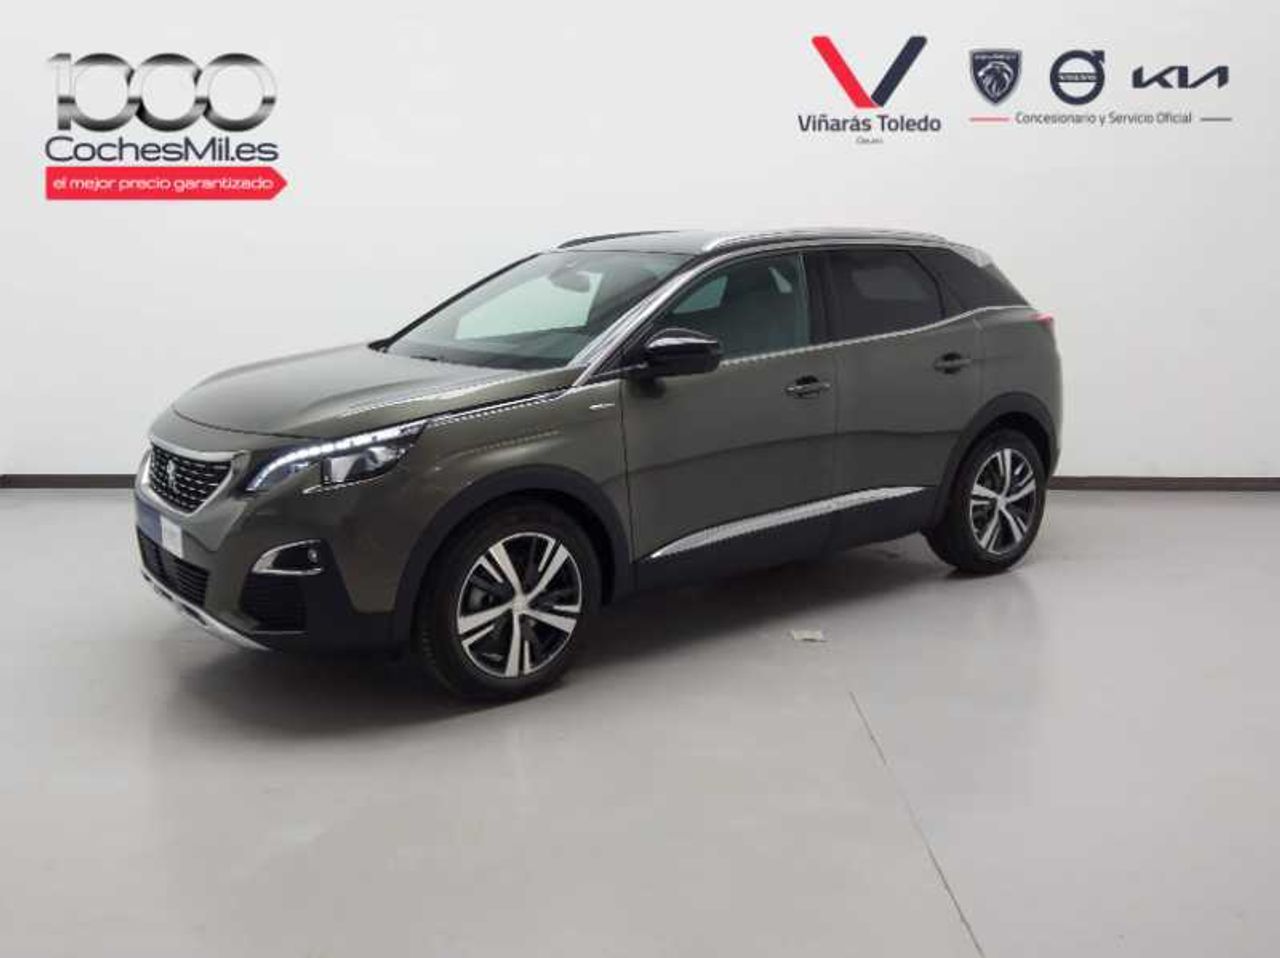 Peugeot 3008 SUV  GT-Line BlueHDi 130 S&S EAT8 ?6.2 (Solo stock) 1